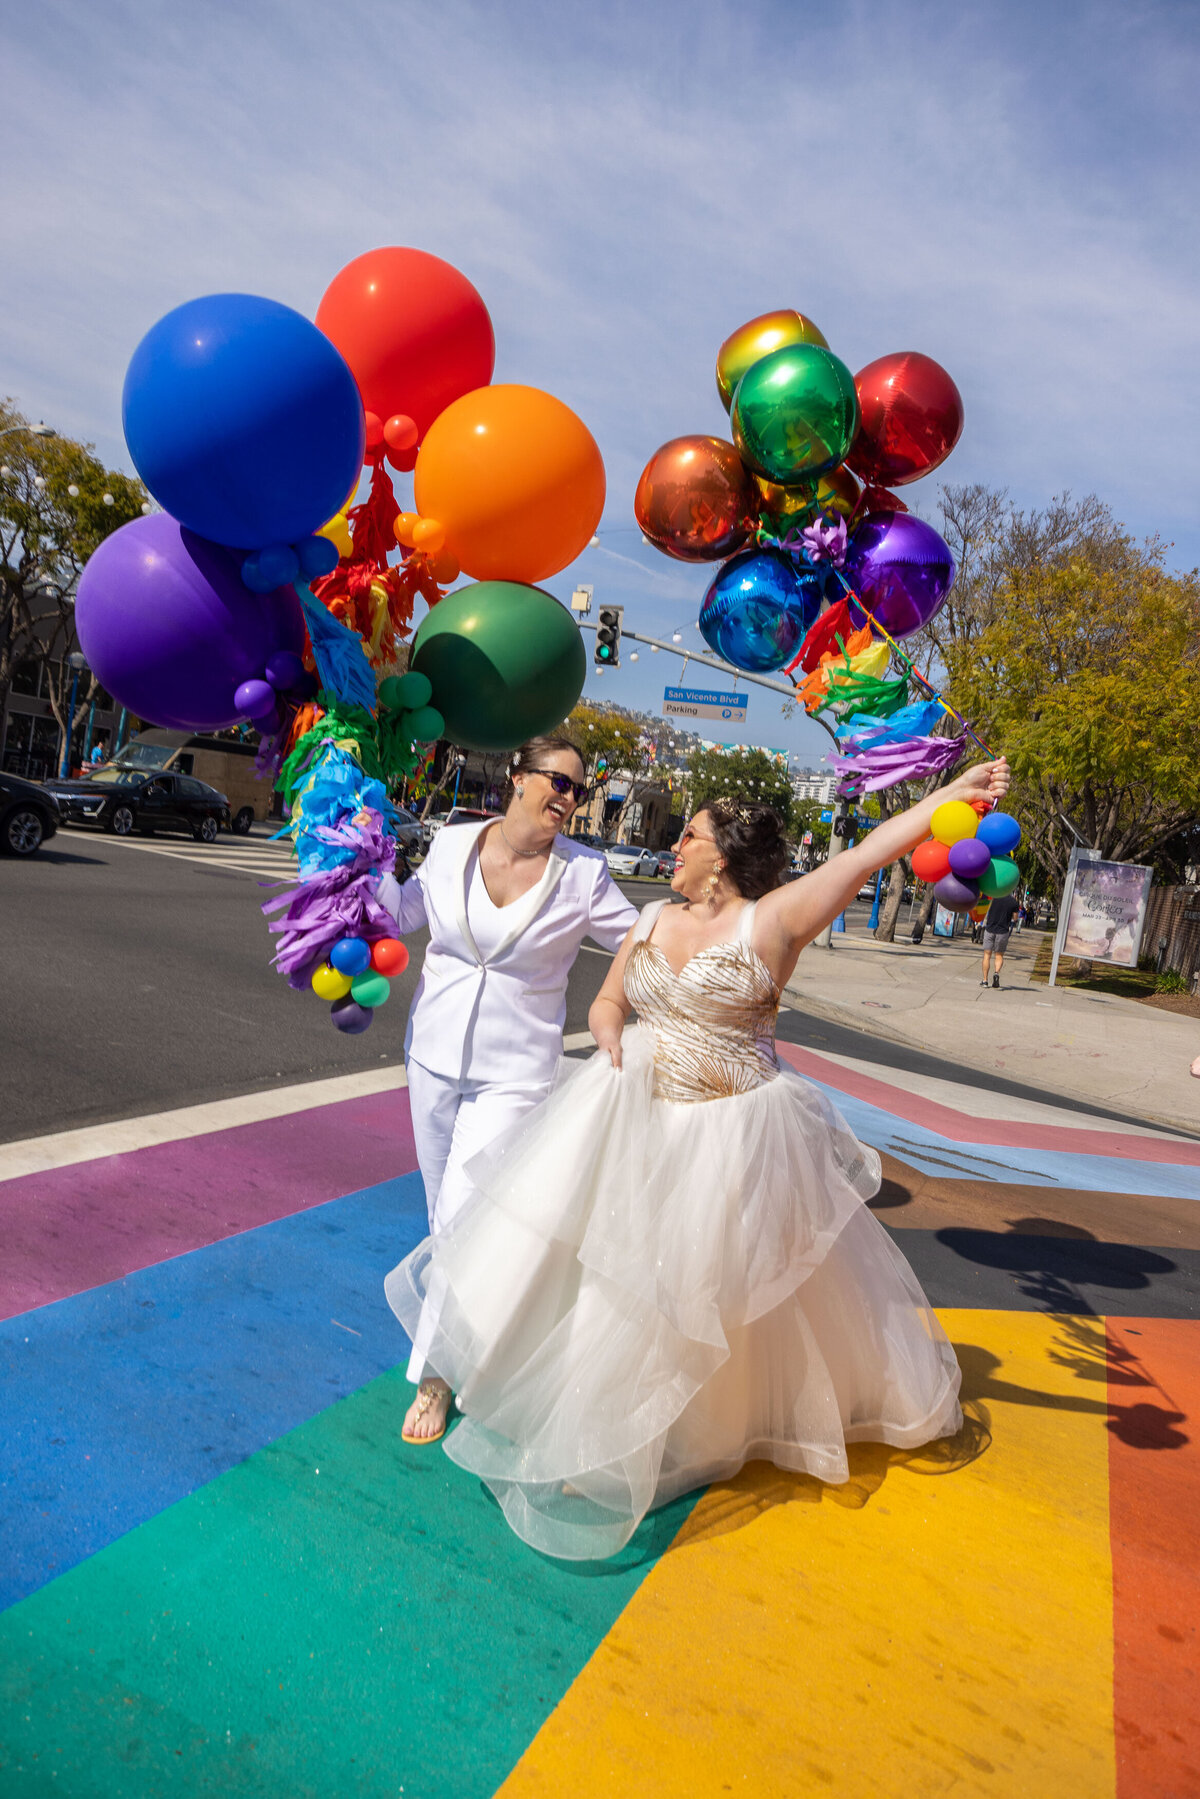 Two brides holding balloons and walking across a sidewalk painted with a pride flag.